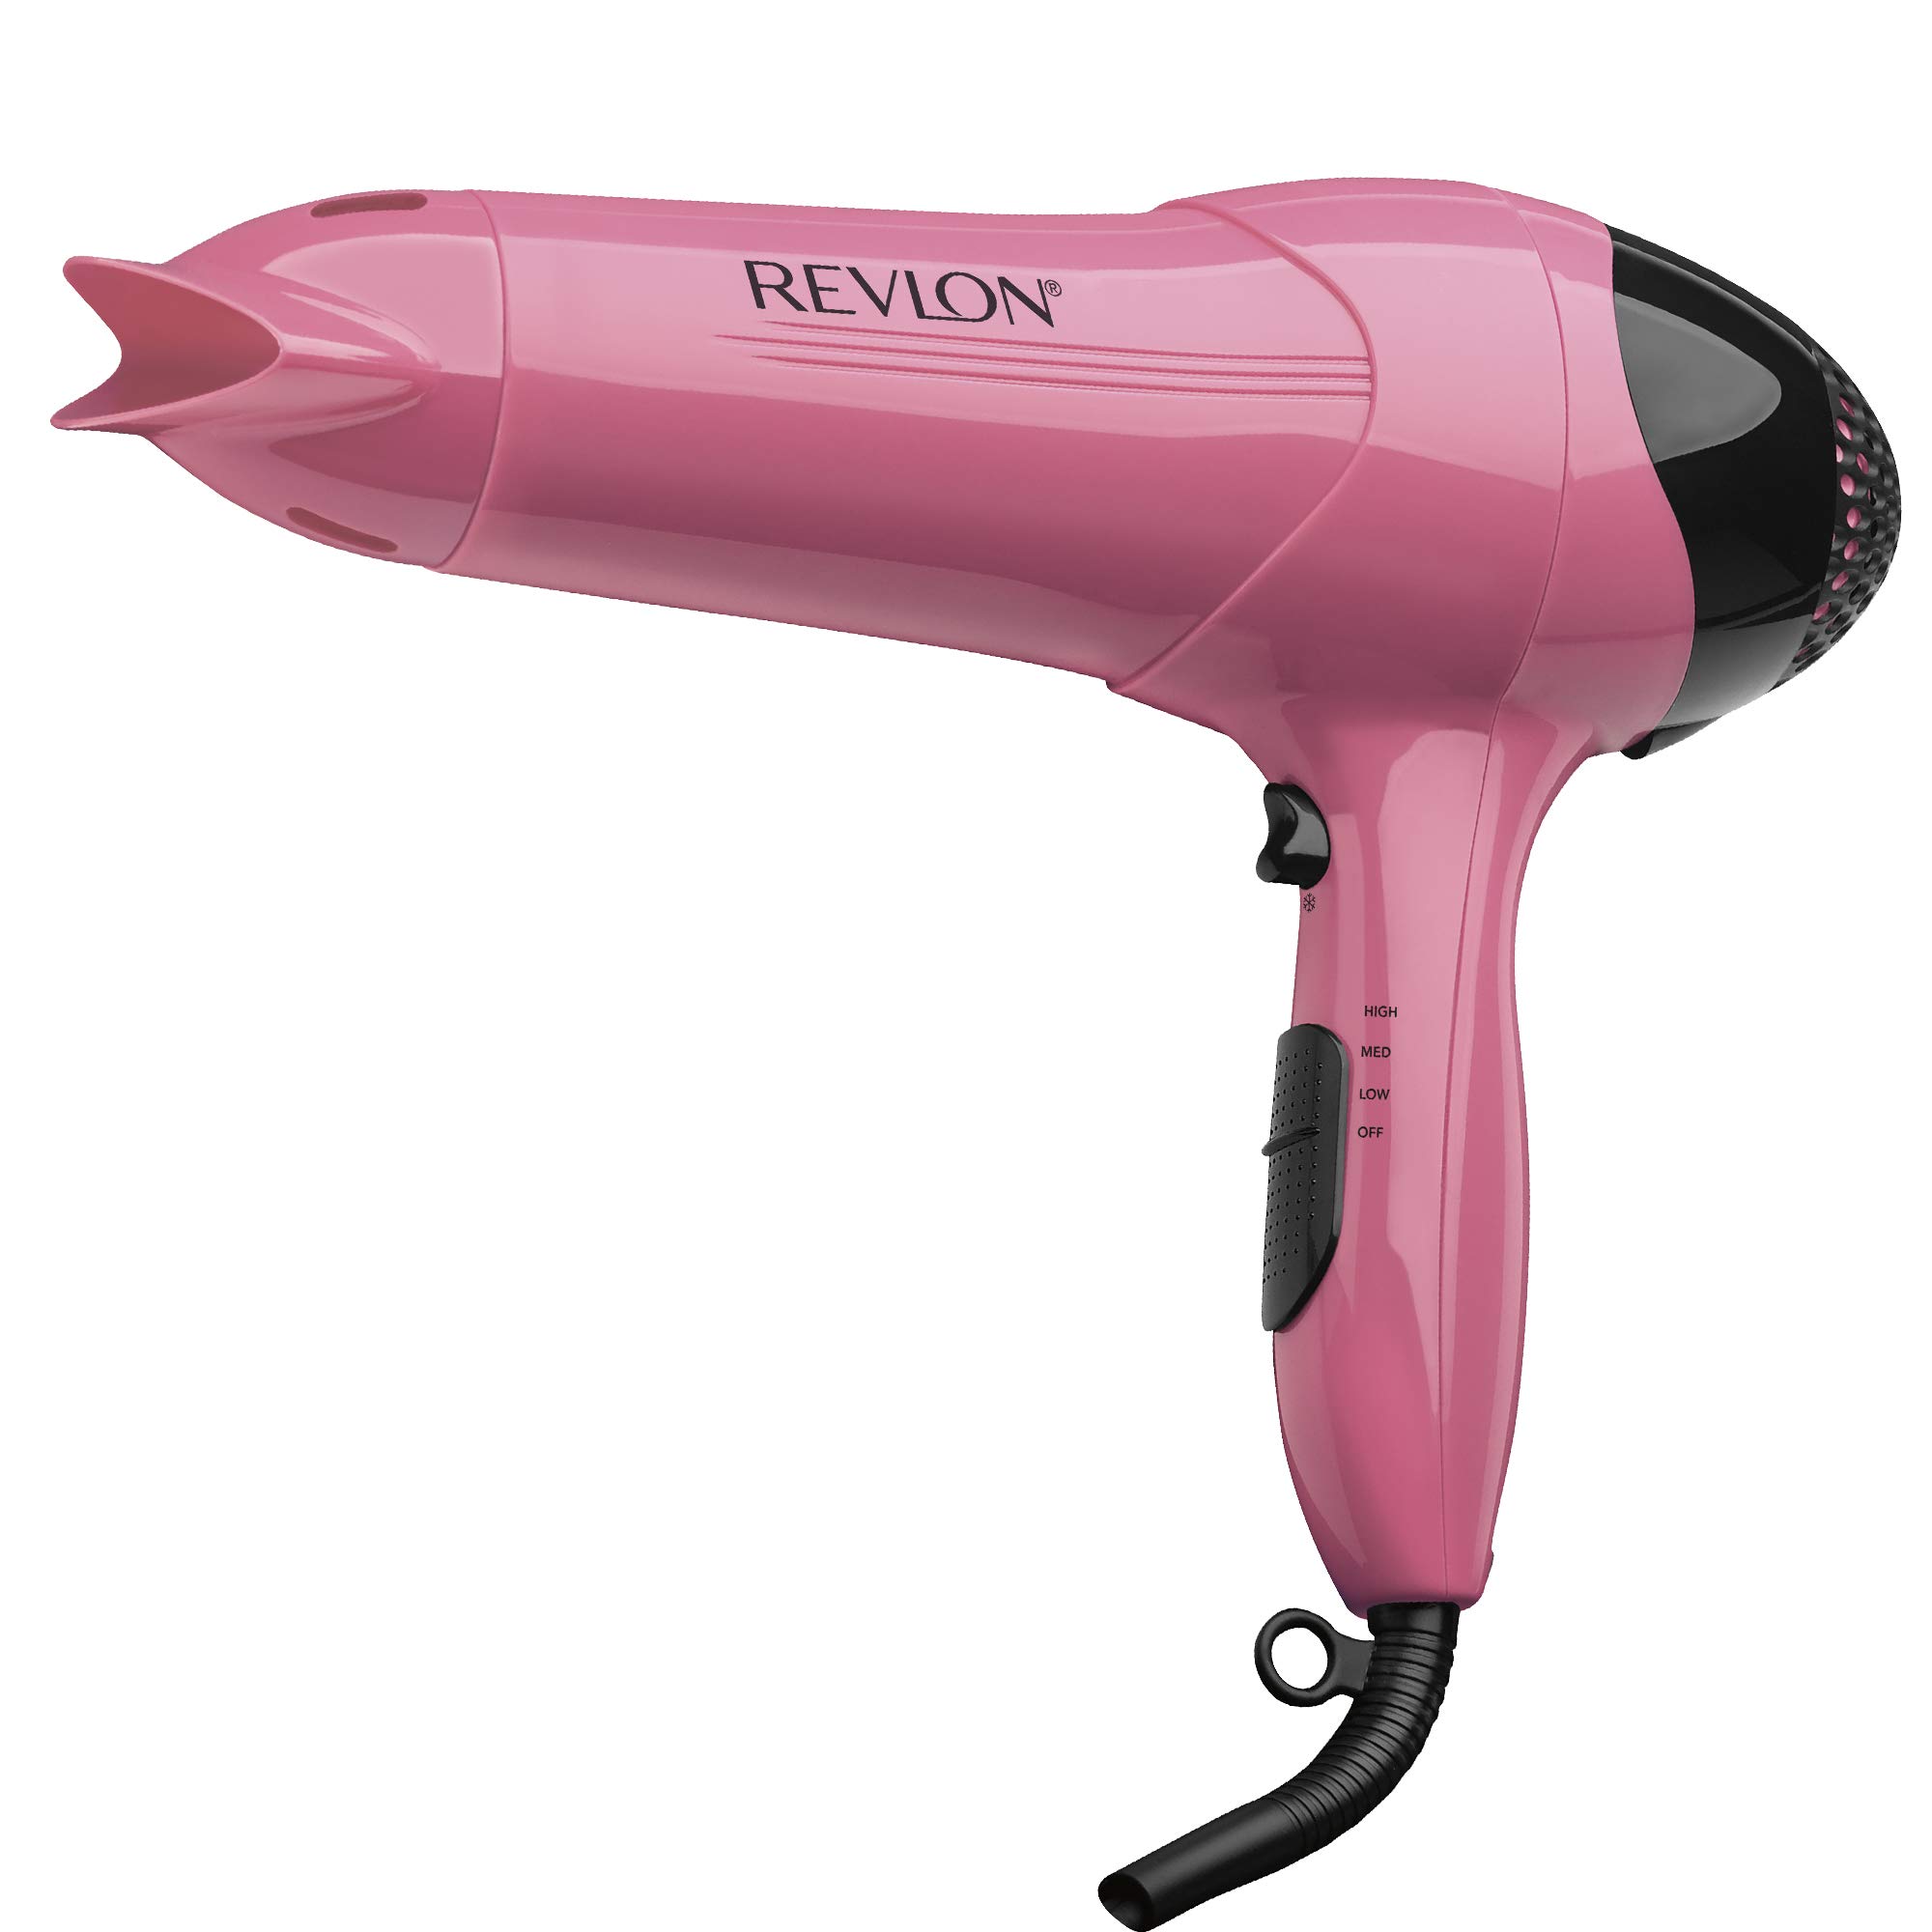 Revlon 1875W Lightweight Hair Dryer | For Easy Smooth Styling (Pink)